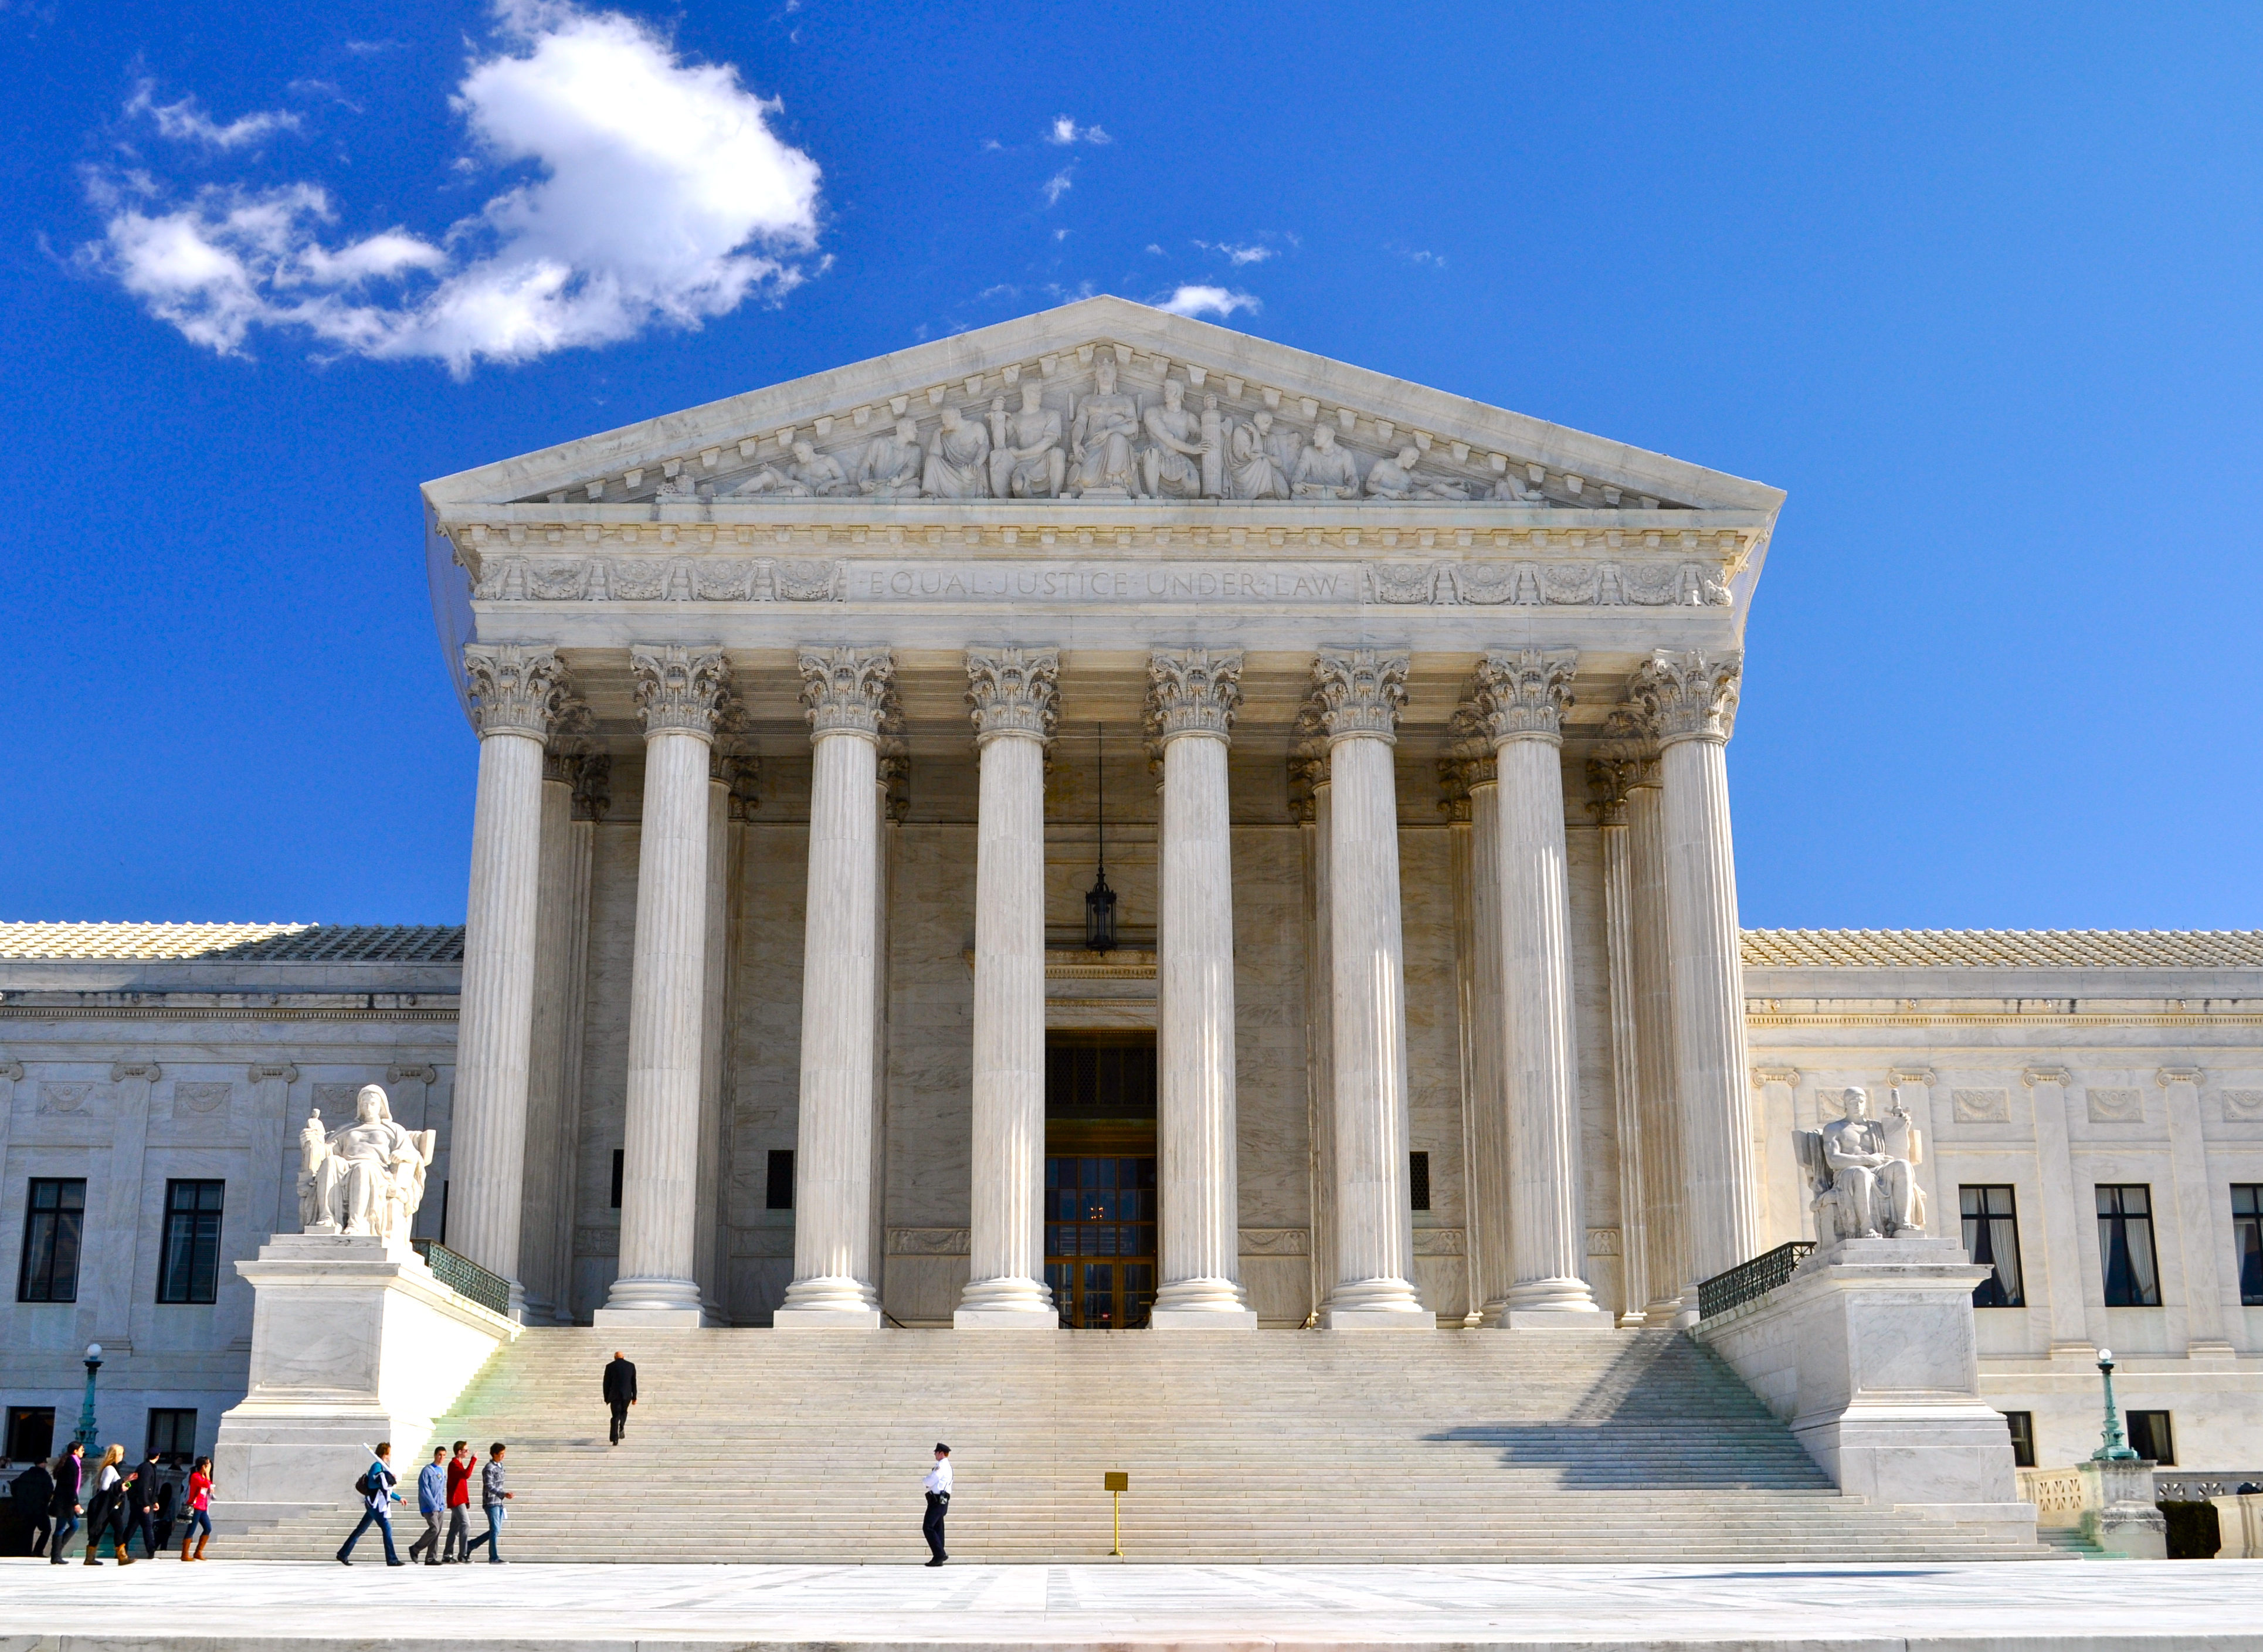 Photograph of the front of the Supreme Court building.